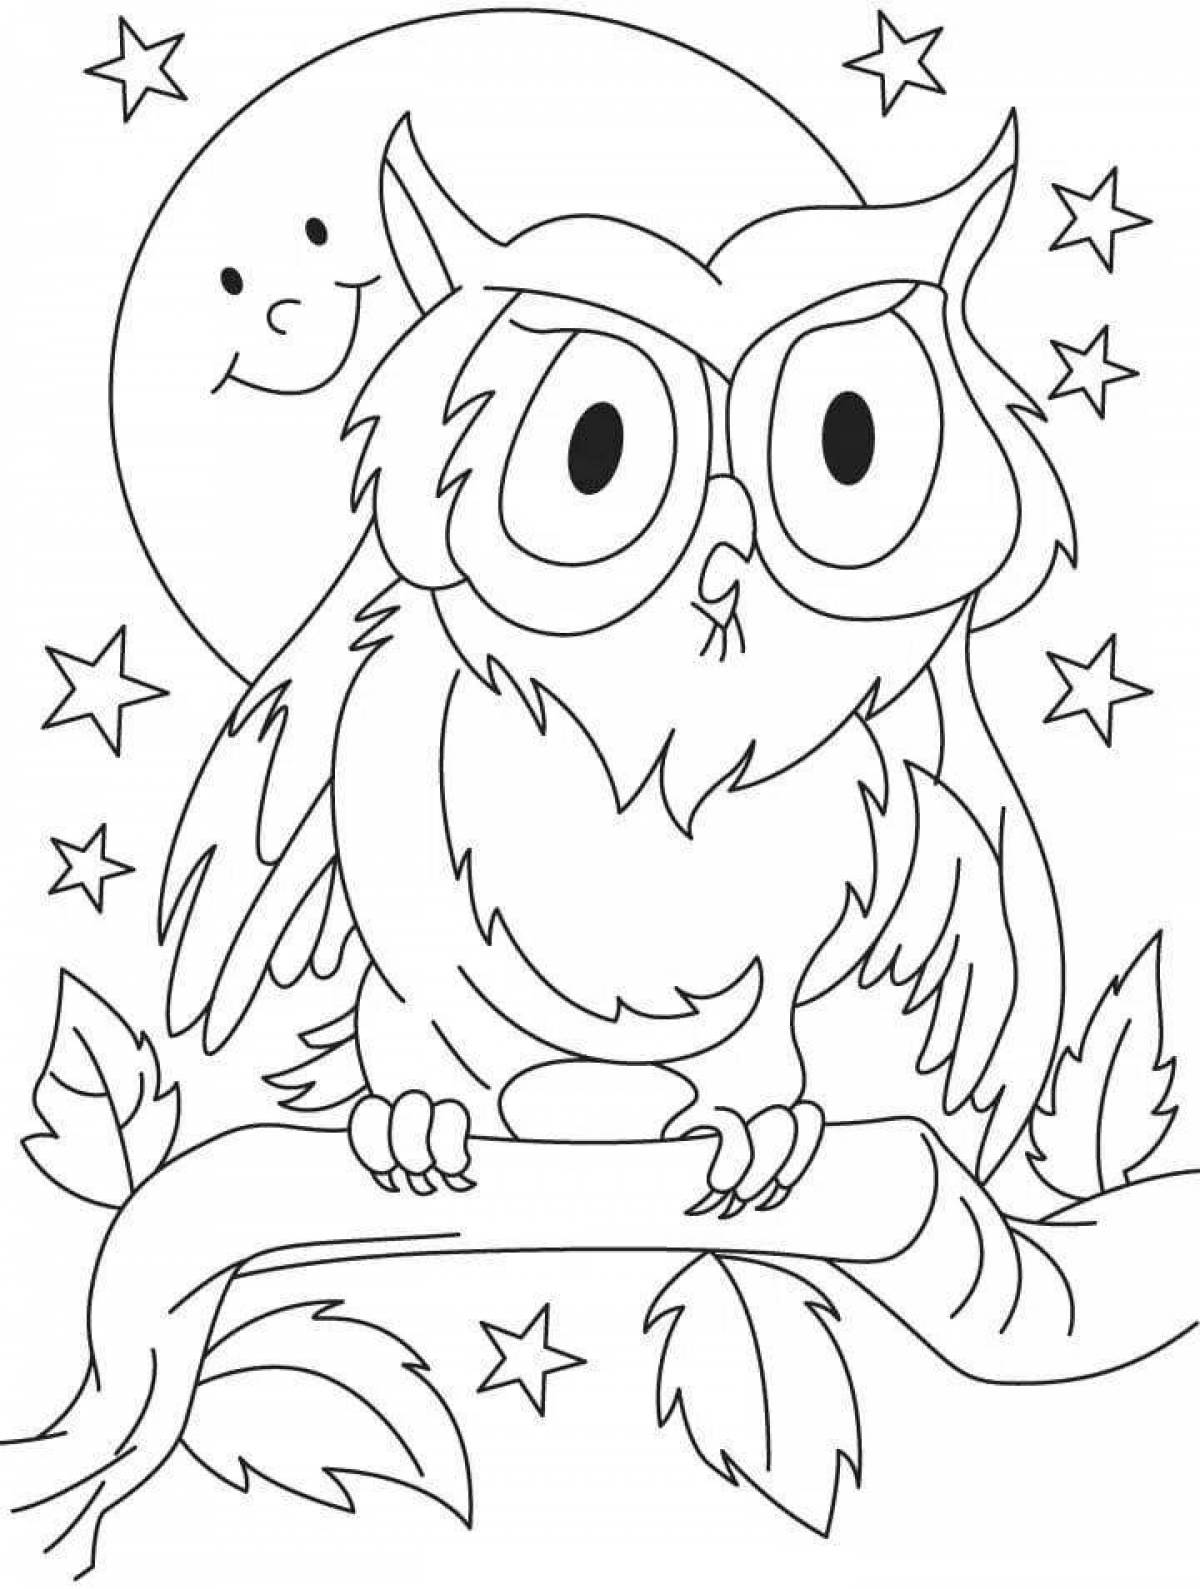 Mysterious owl coloring pages